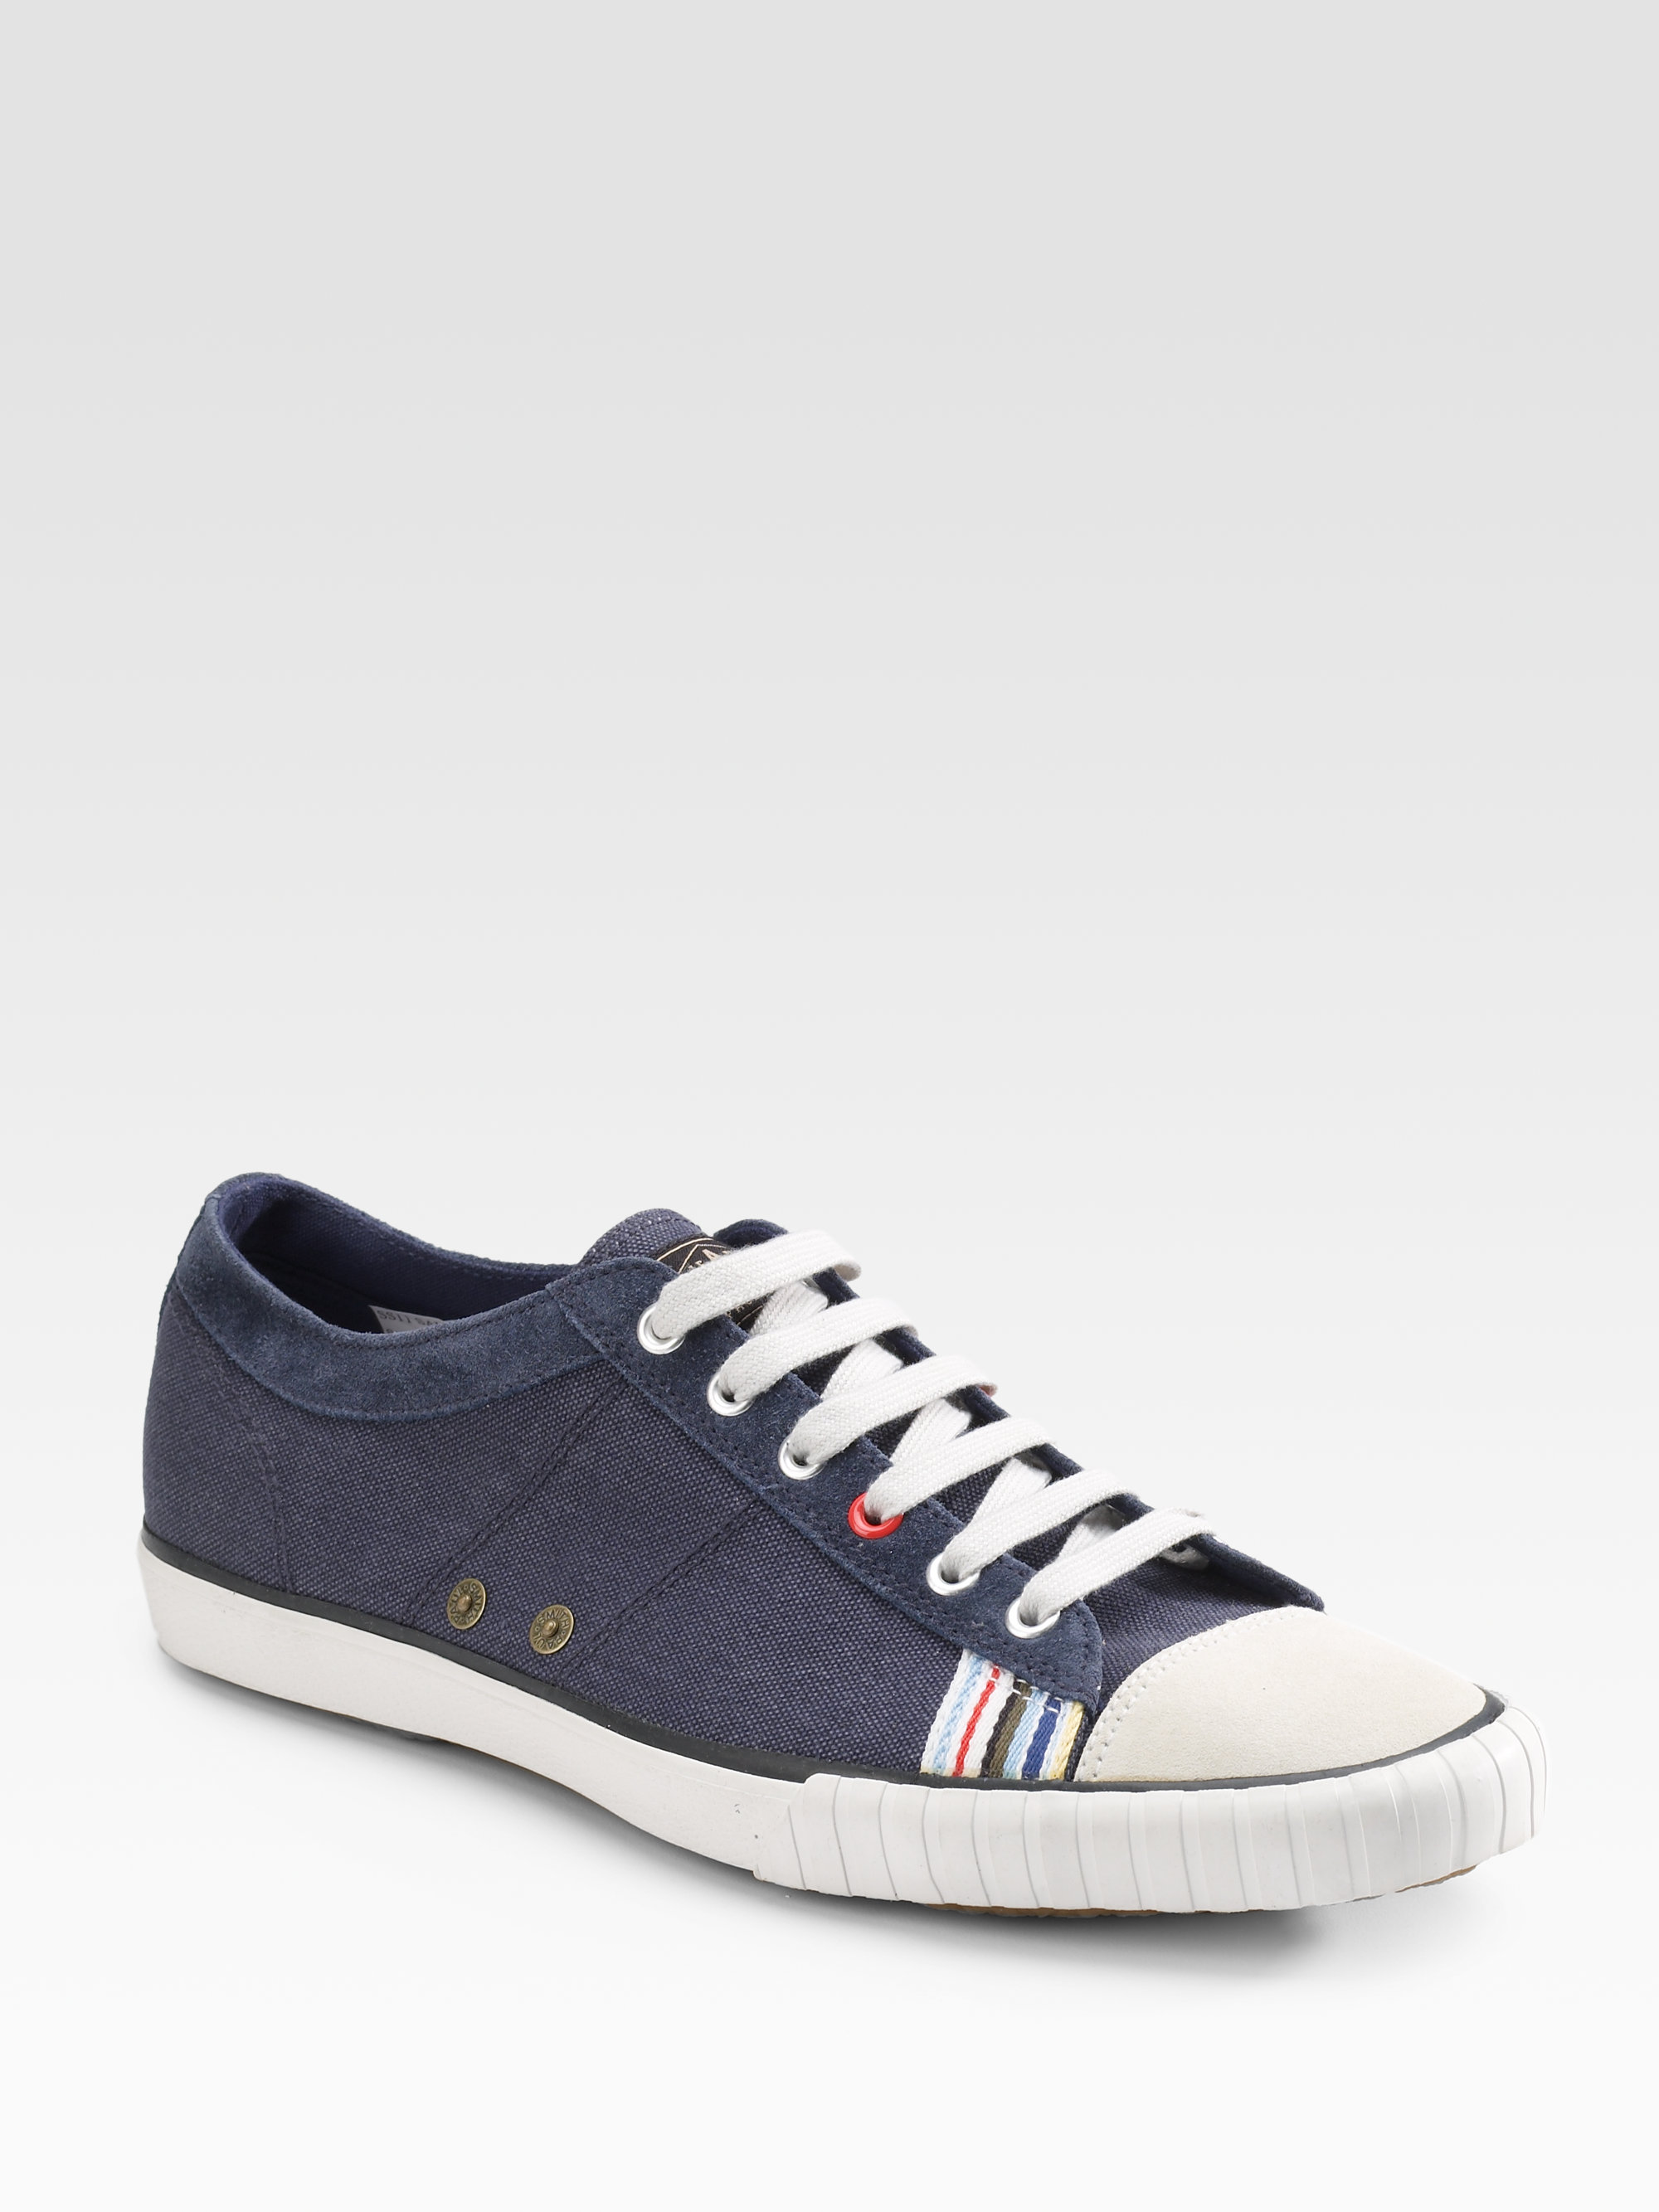 Paul Smith Canvas Sneakers in Blue for 